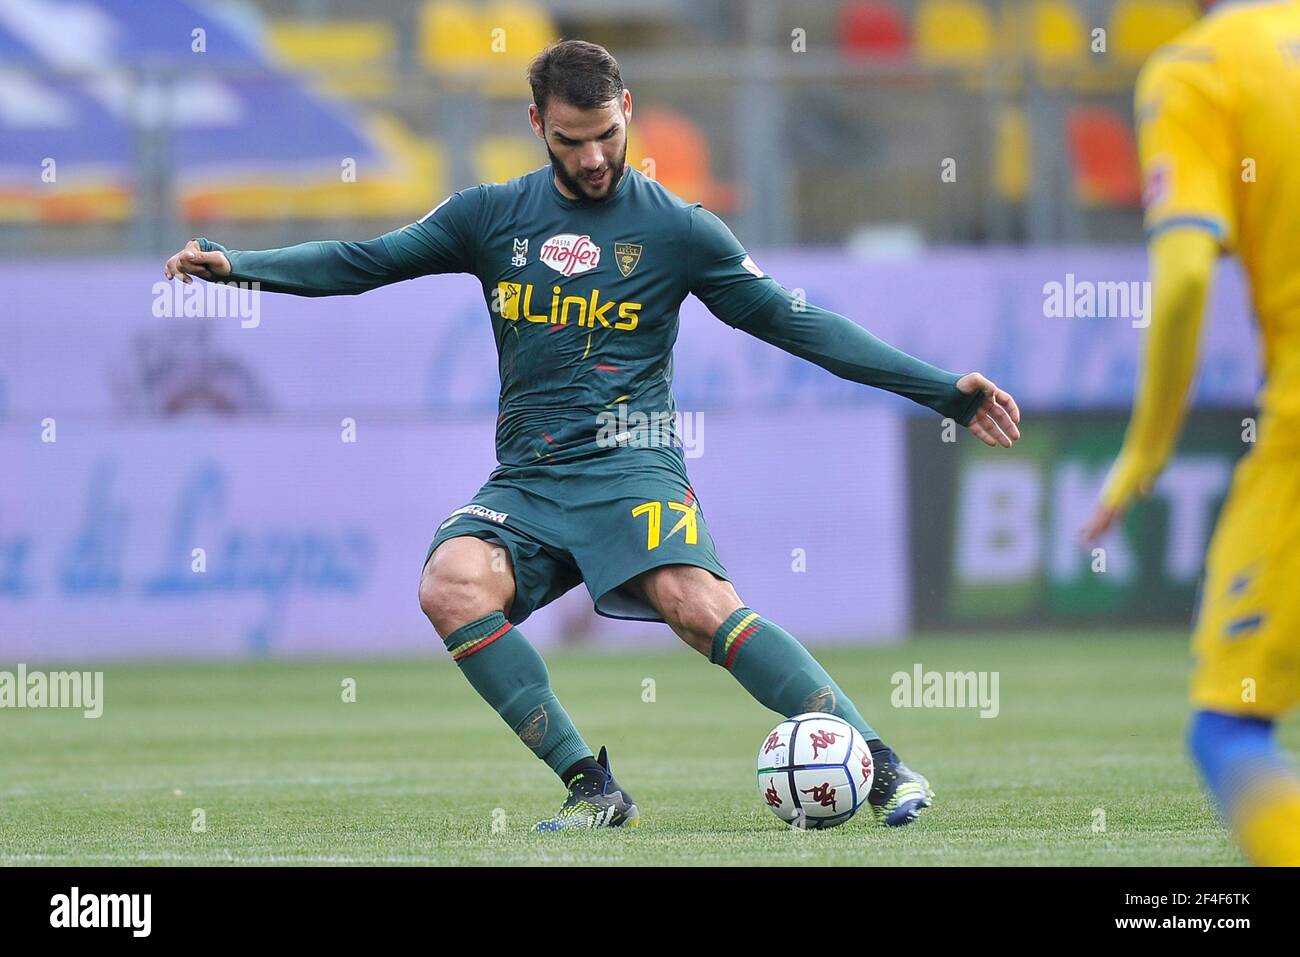 Panagiotis Tachtsidis player of Lecce, during the match of the Italian league series B between Frosinone vs Lecce final result 0-3, match played at th Stock Photo